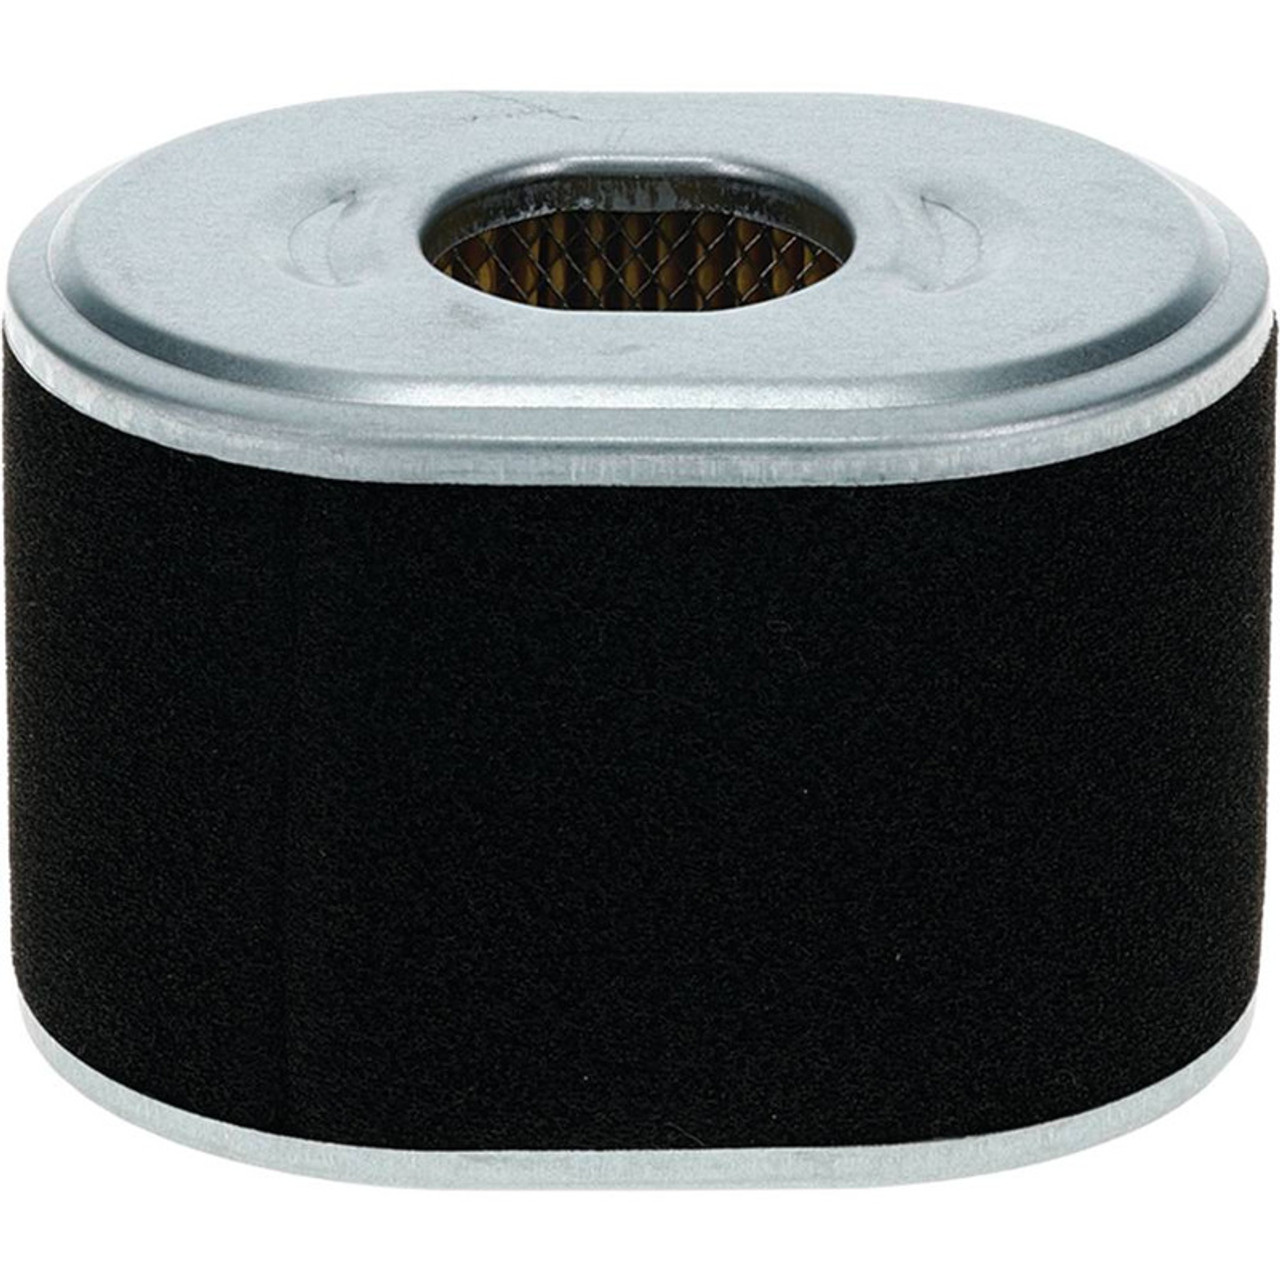 Air Filter for Wacker 0217458, 217458 Shop Pack of 12 Air Filters, includes foam pre cleaner wrap